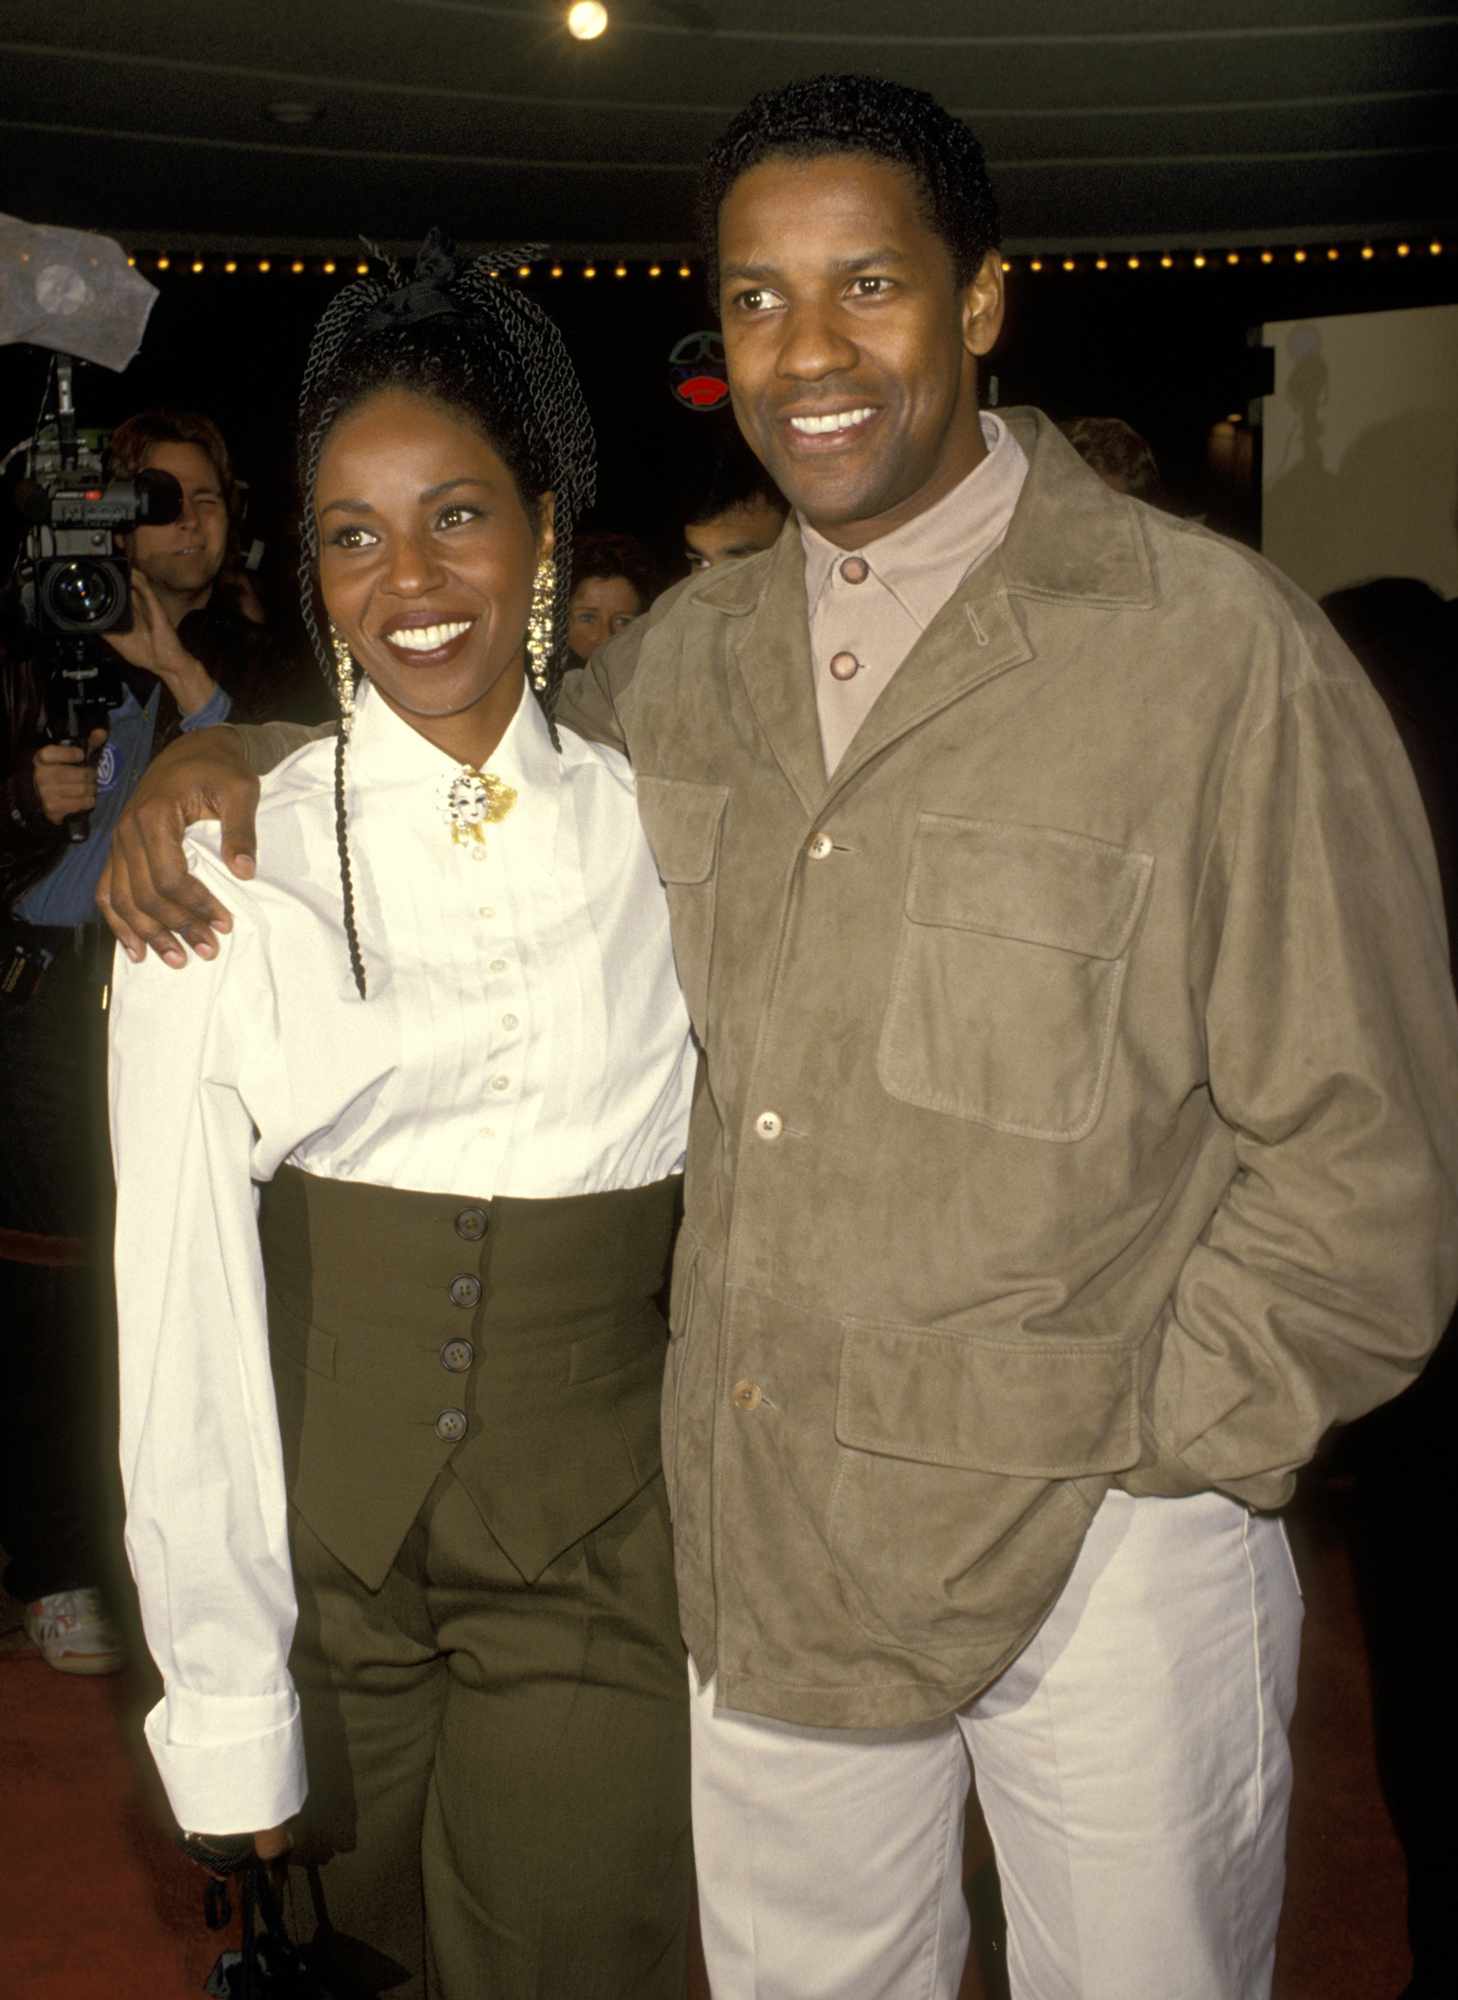 Denzel Washington and Pauletta Washington during Screening of "The Pelican Brief" at Mann's Bruin Theater in Westwood, CA, United States